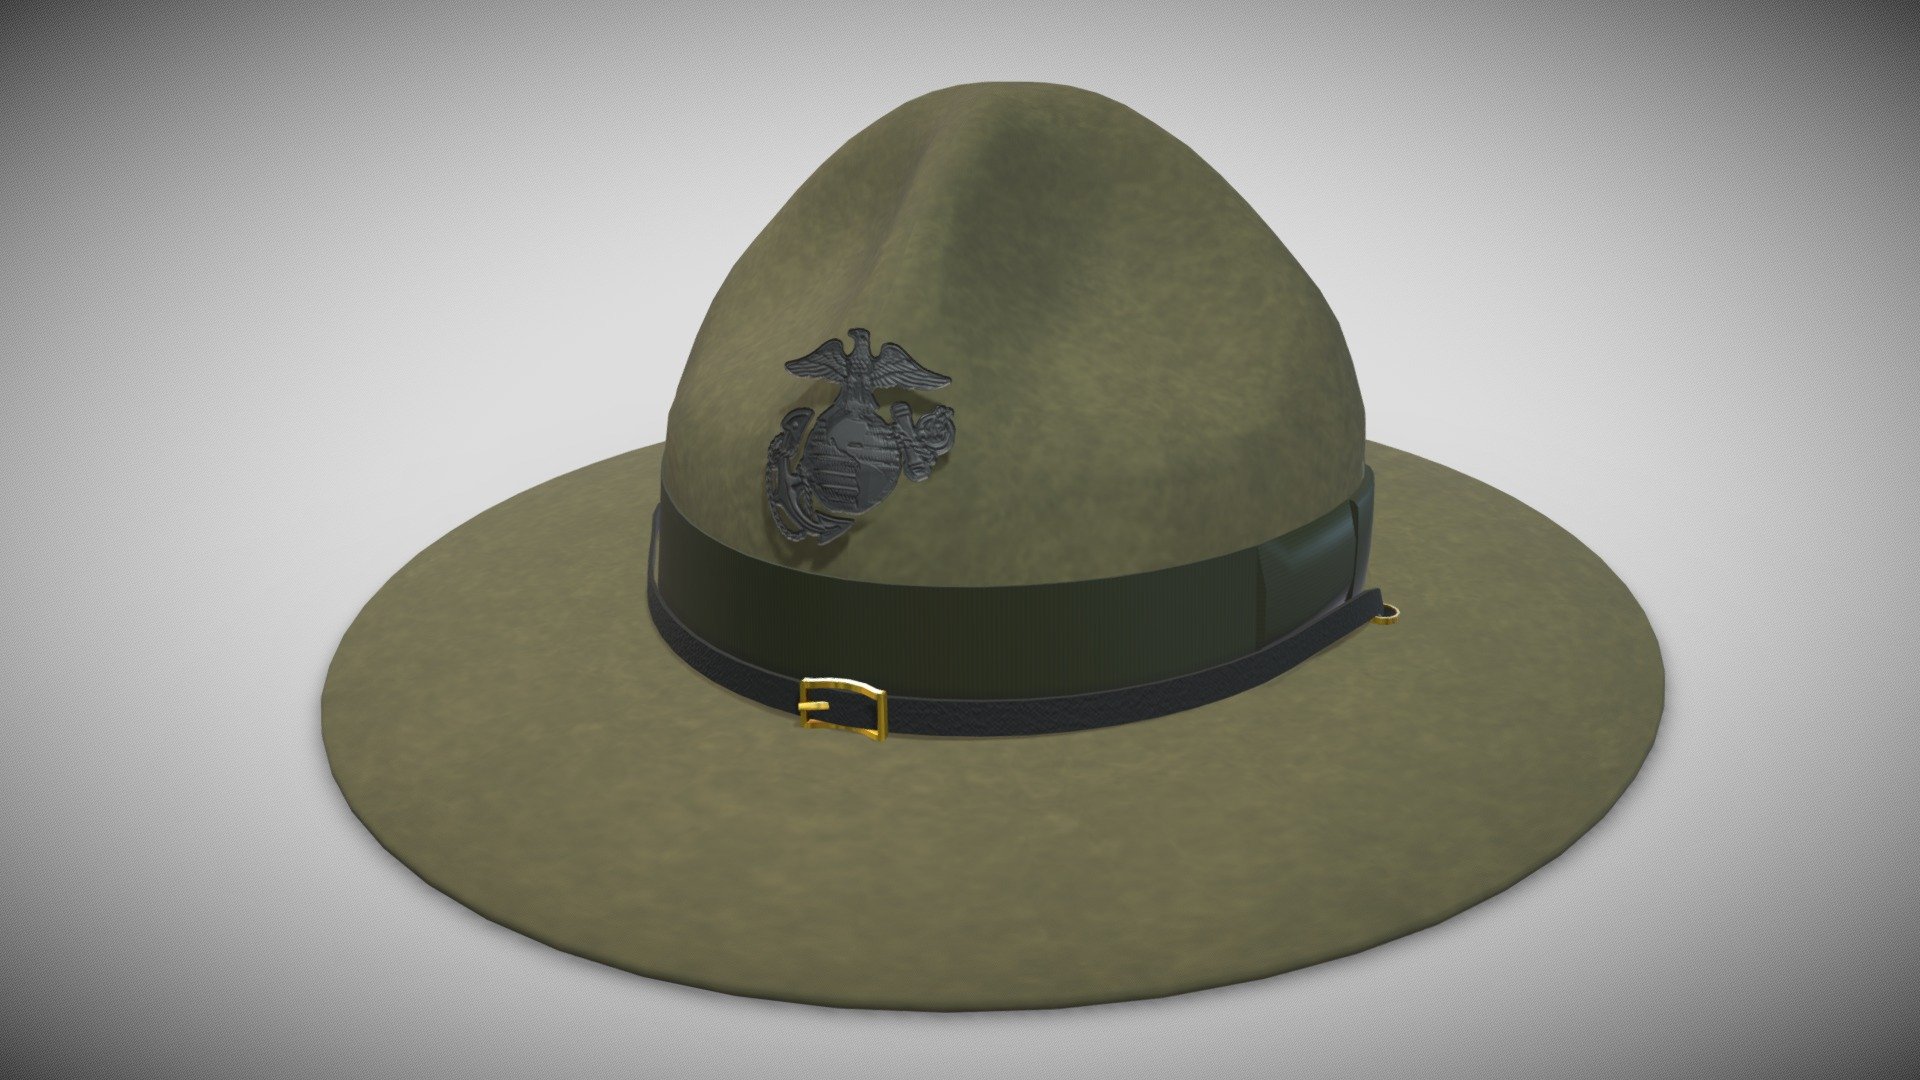 The &ldquo;Campaign Hat